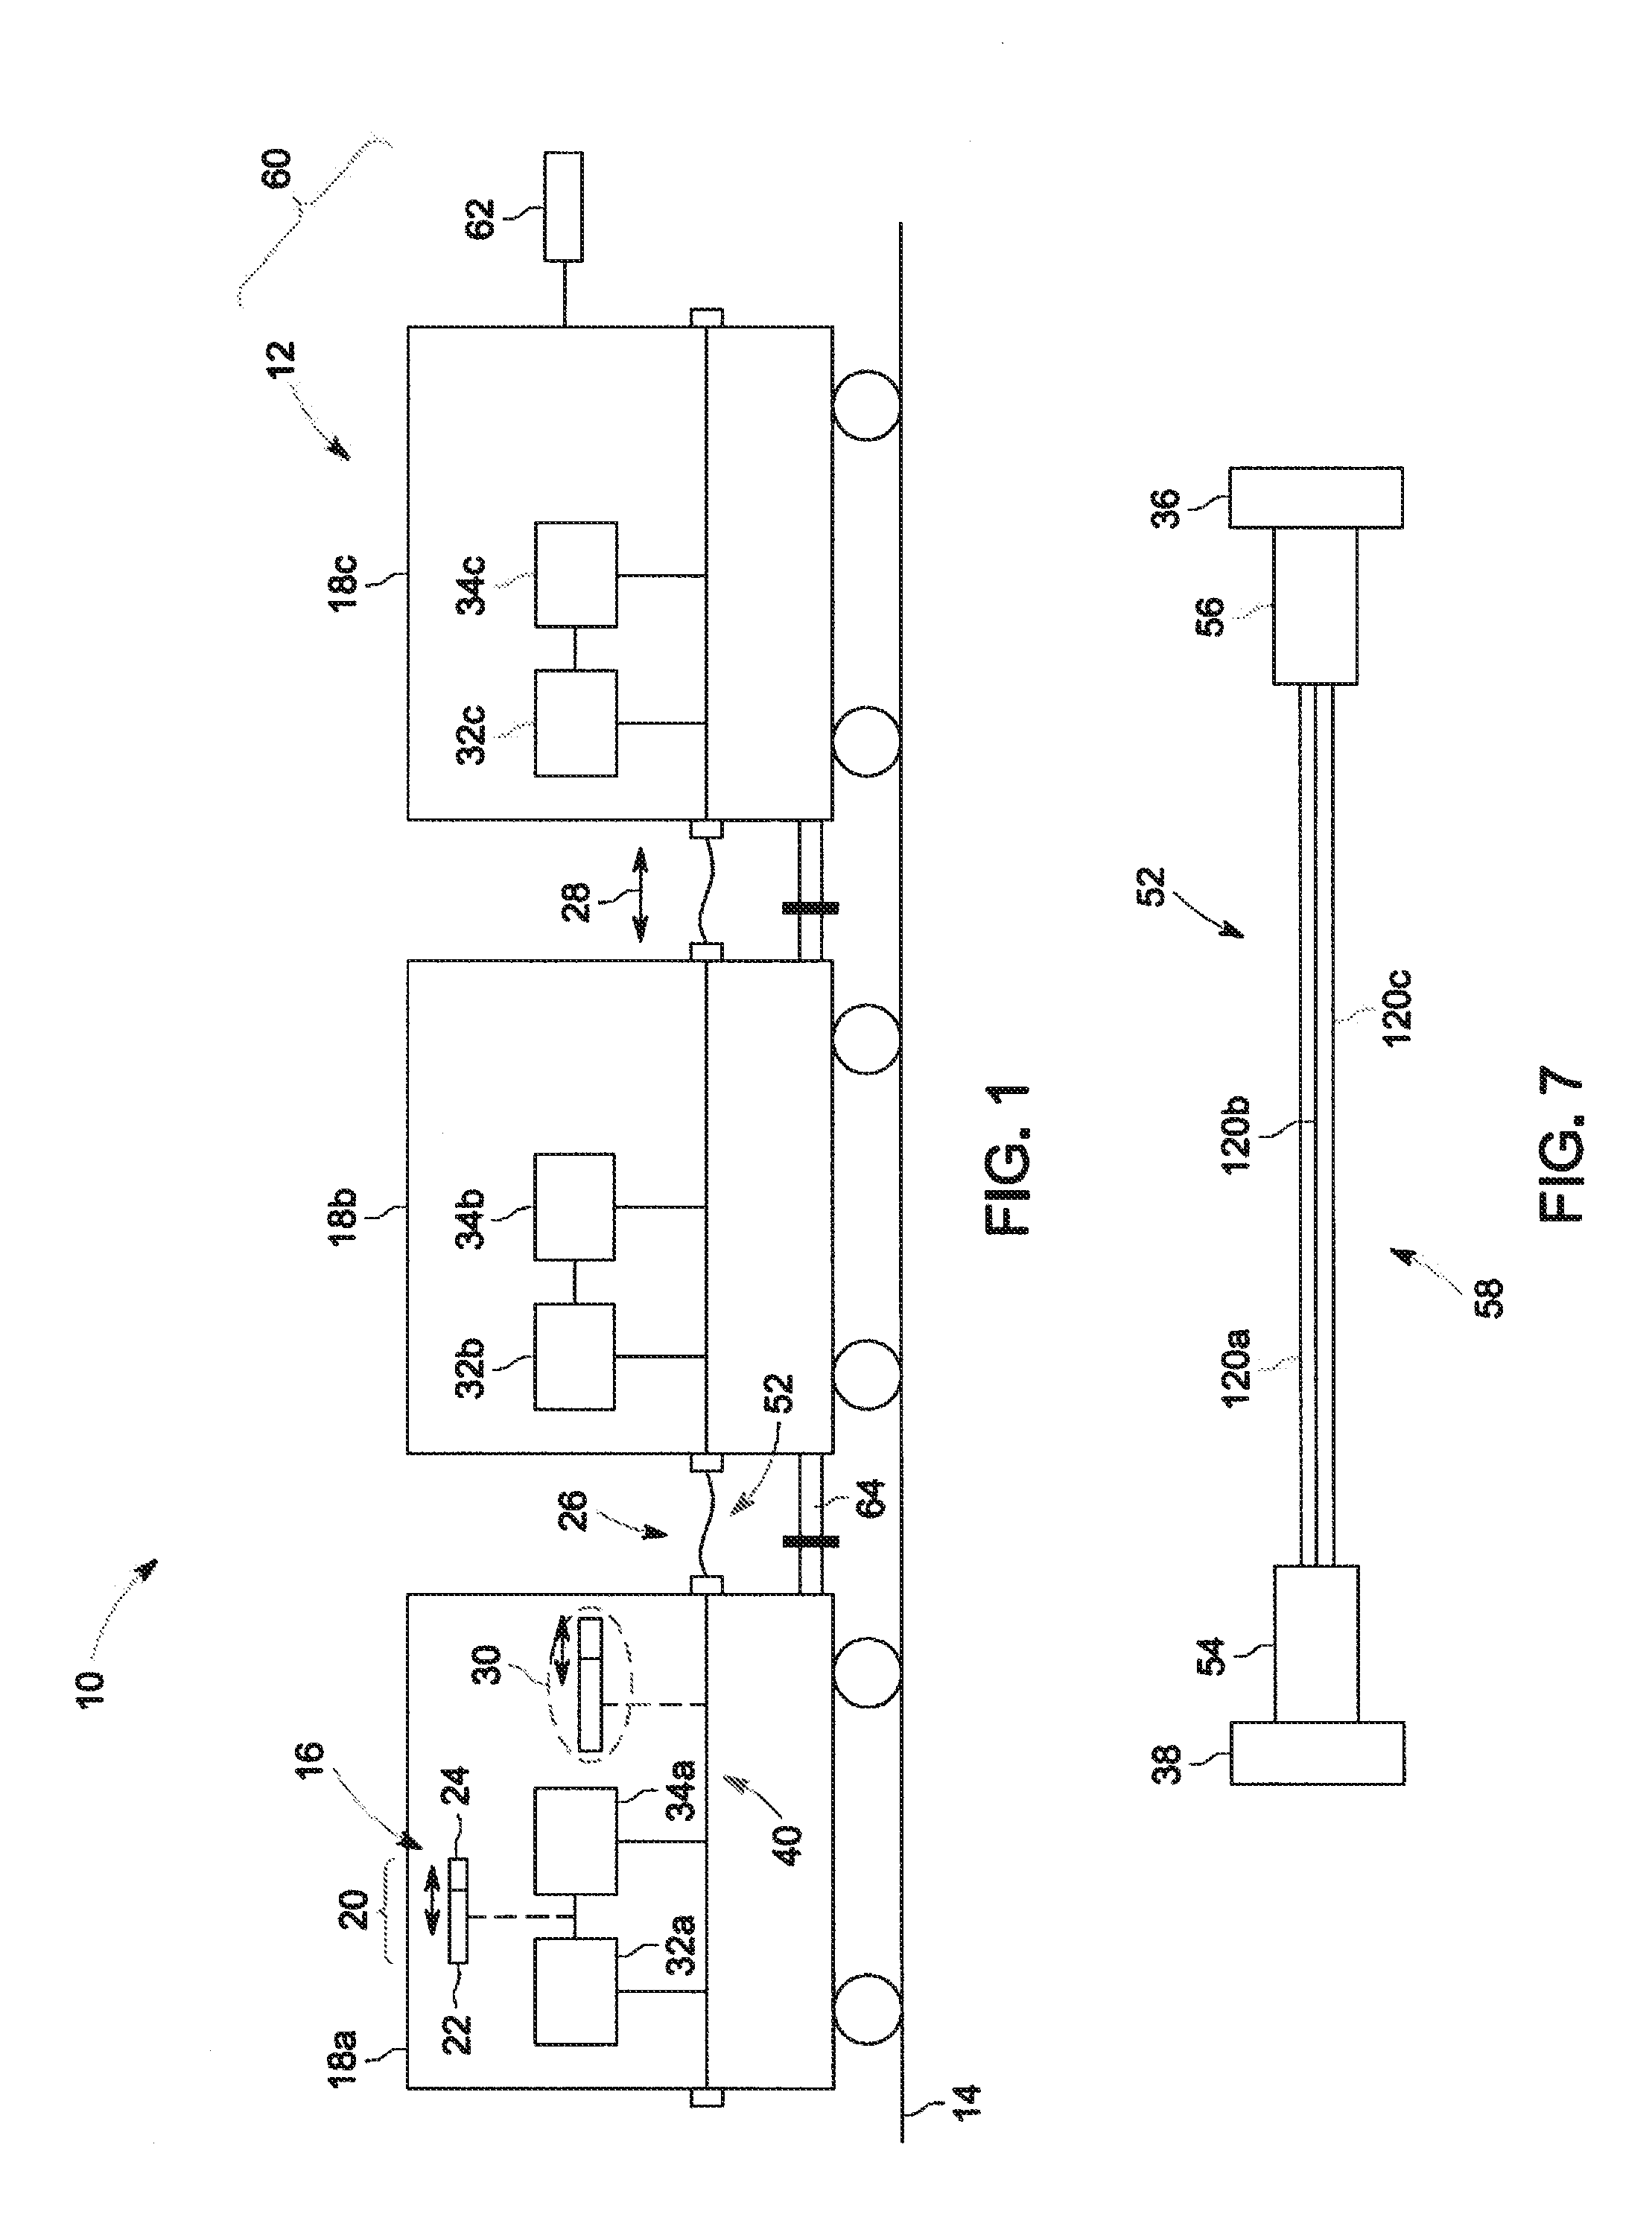 System and method for locomotive inter-consist equipment sparing and redundancy